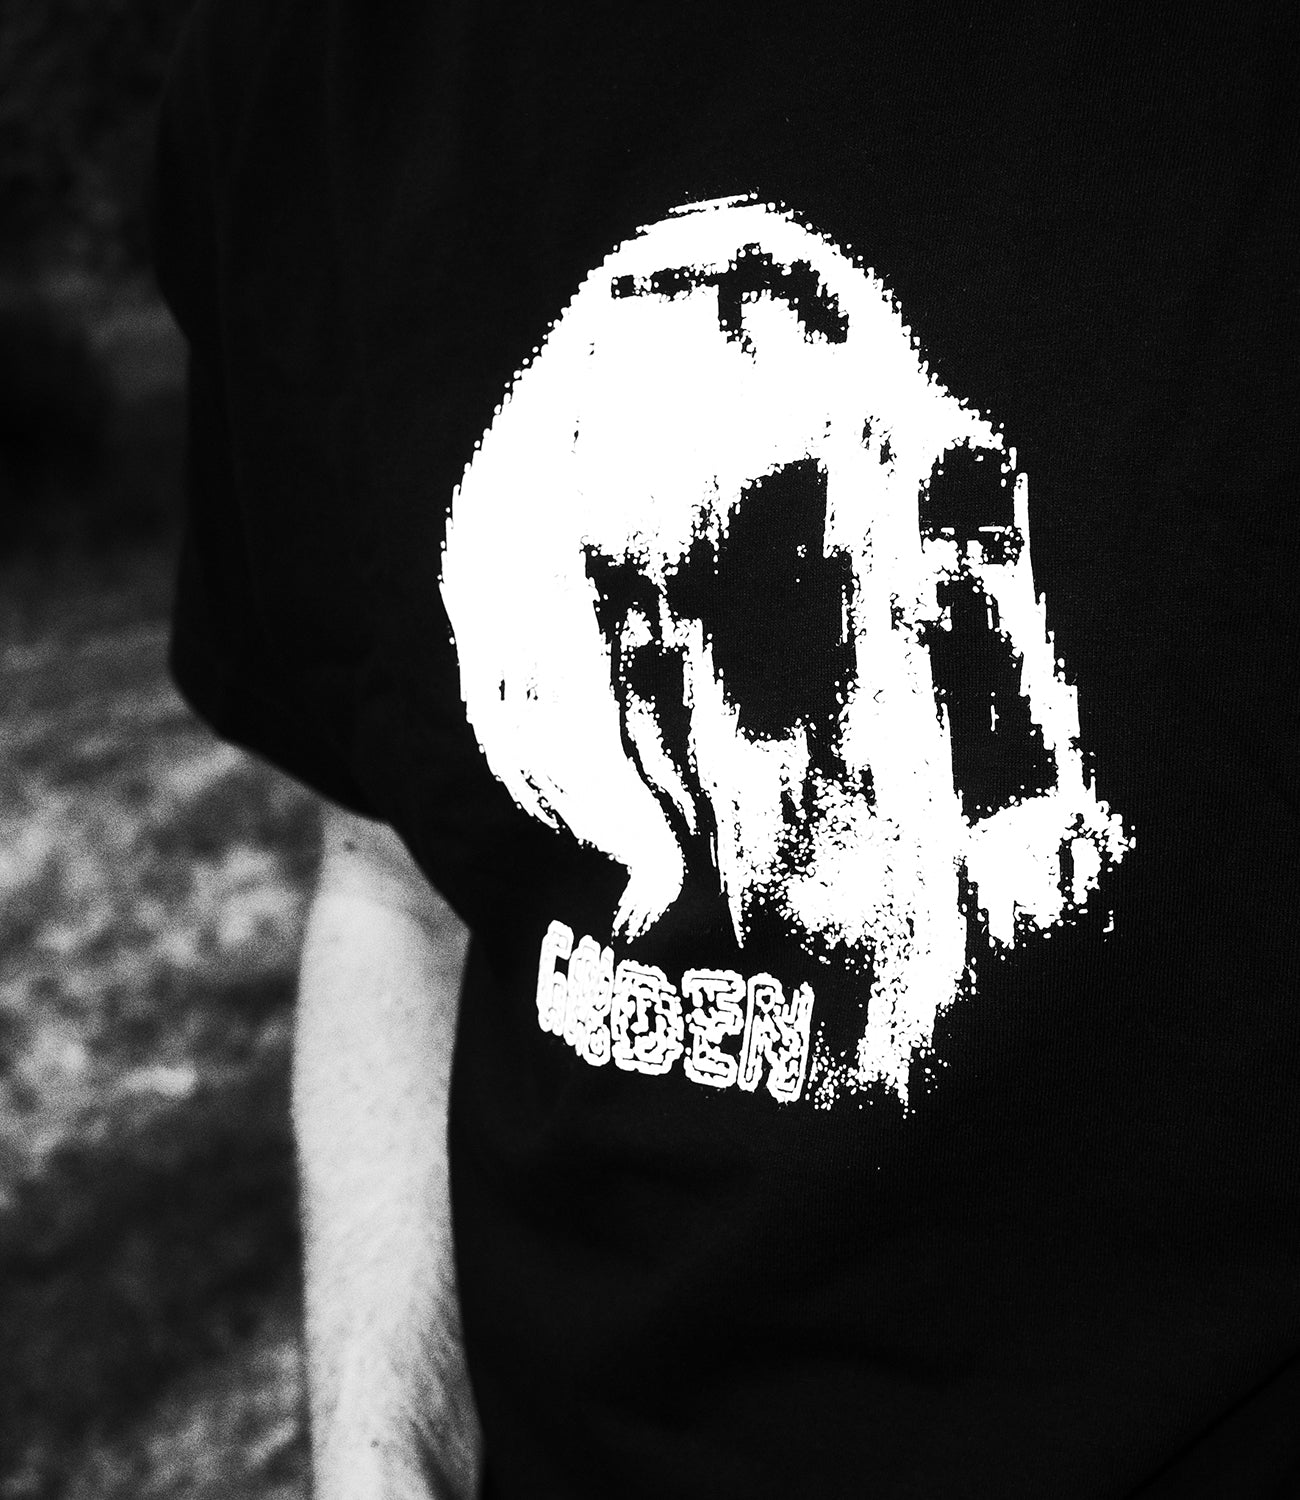 Void Patience T-Shirt